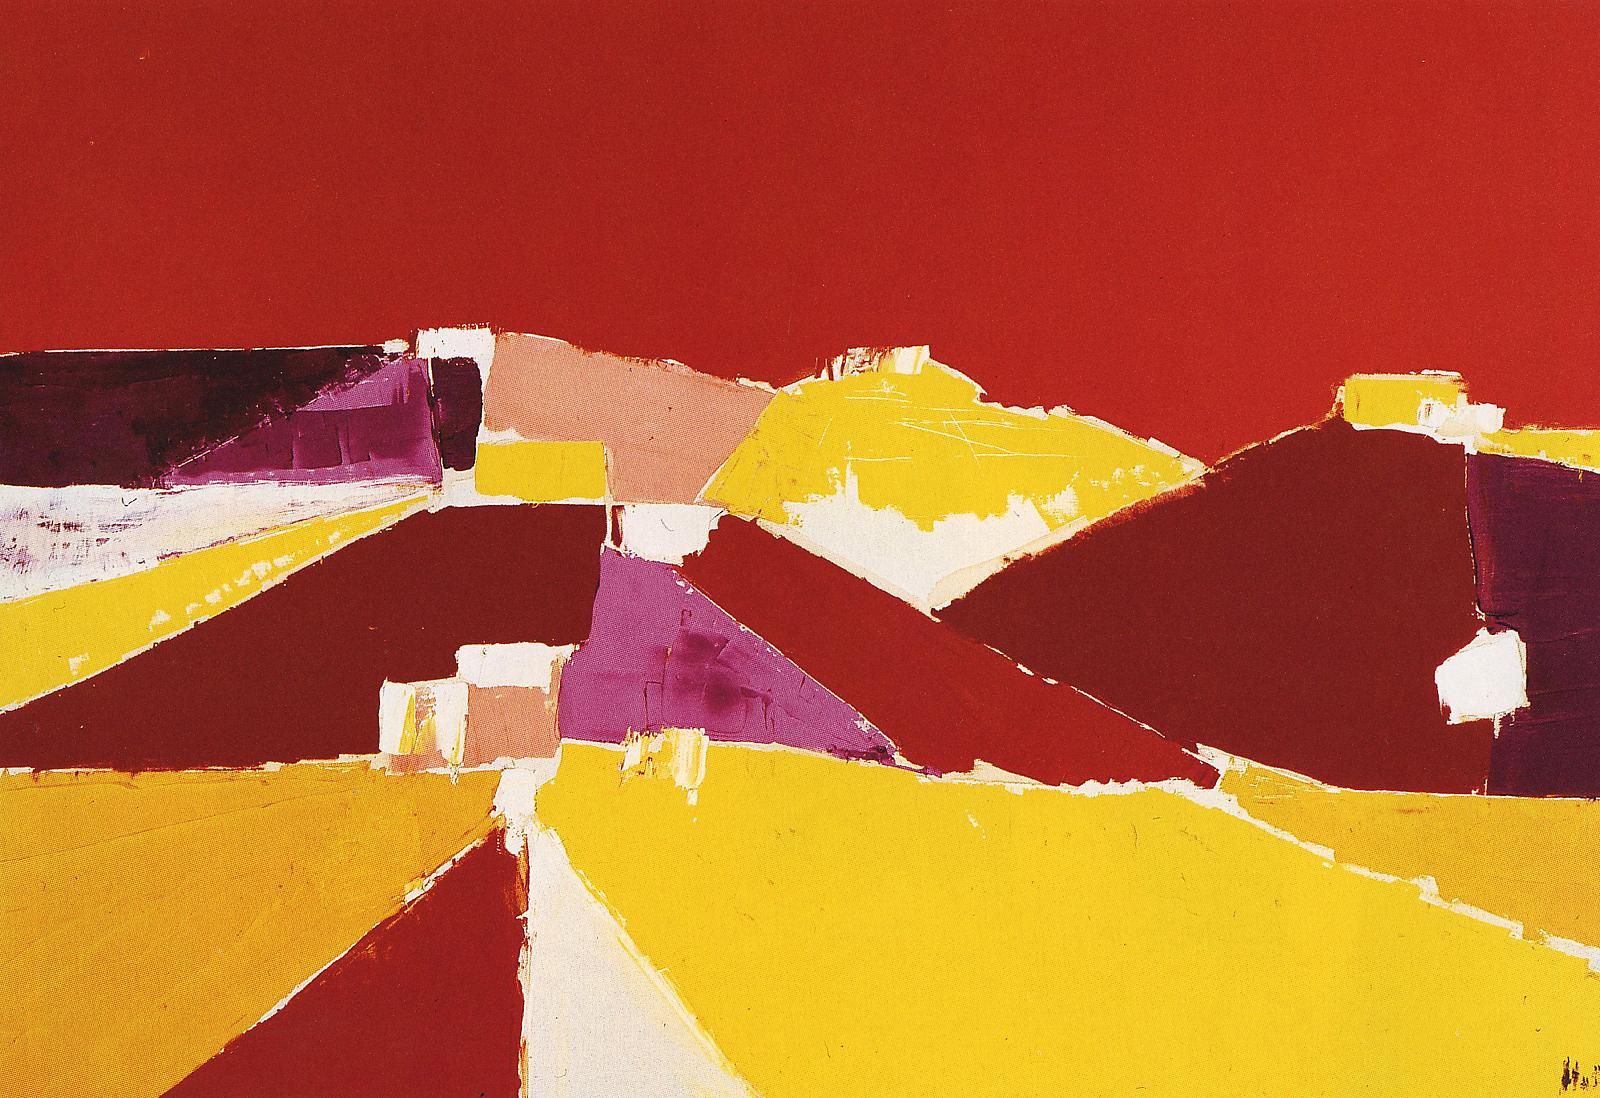 Nicolas de Staël, Agrigente, 1953, oil on canvas, 35 by 51 1/8 inches (courtesy of Mitchell-Innes and Nash)